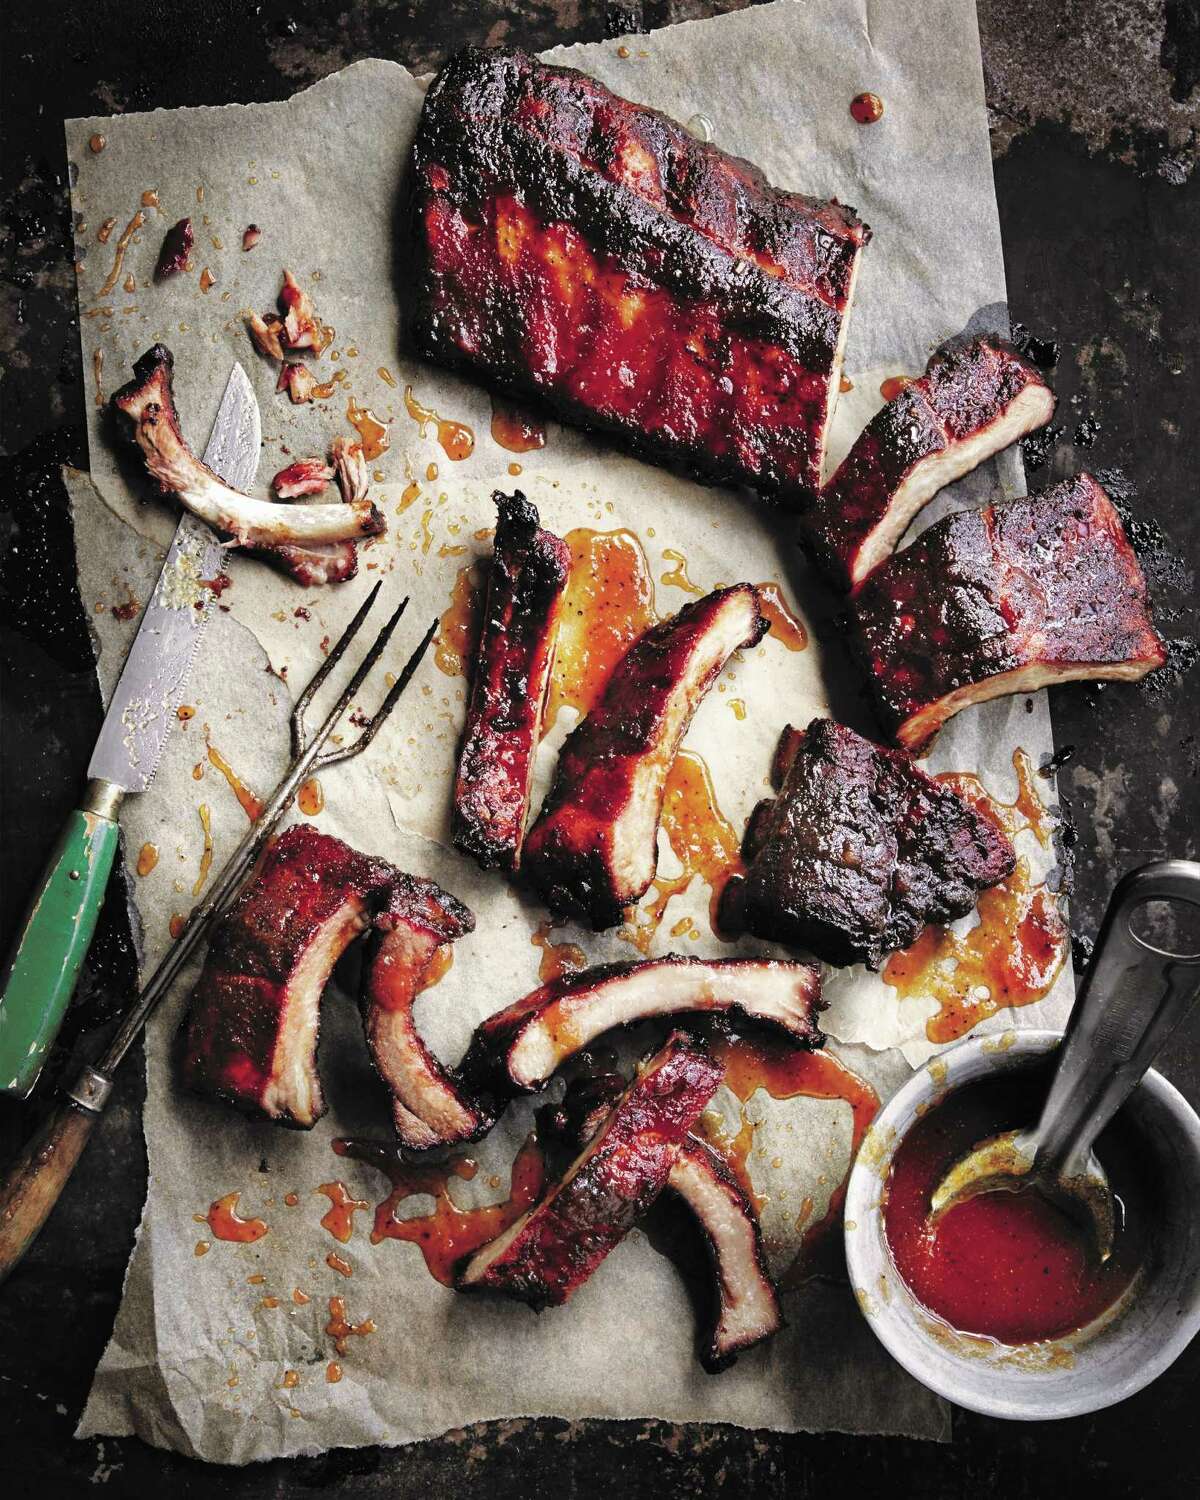 Baby Back Ribs made by Christopher Prieto from Southern Living Ultimate Book of BBQ